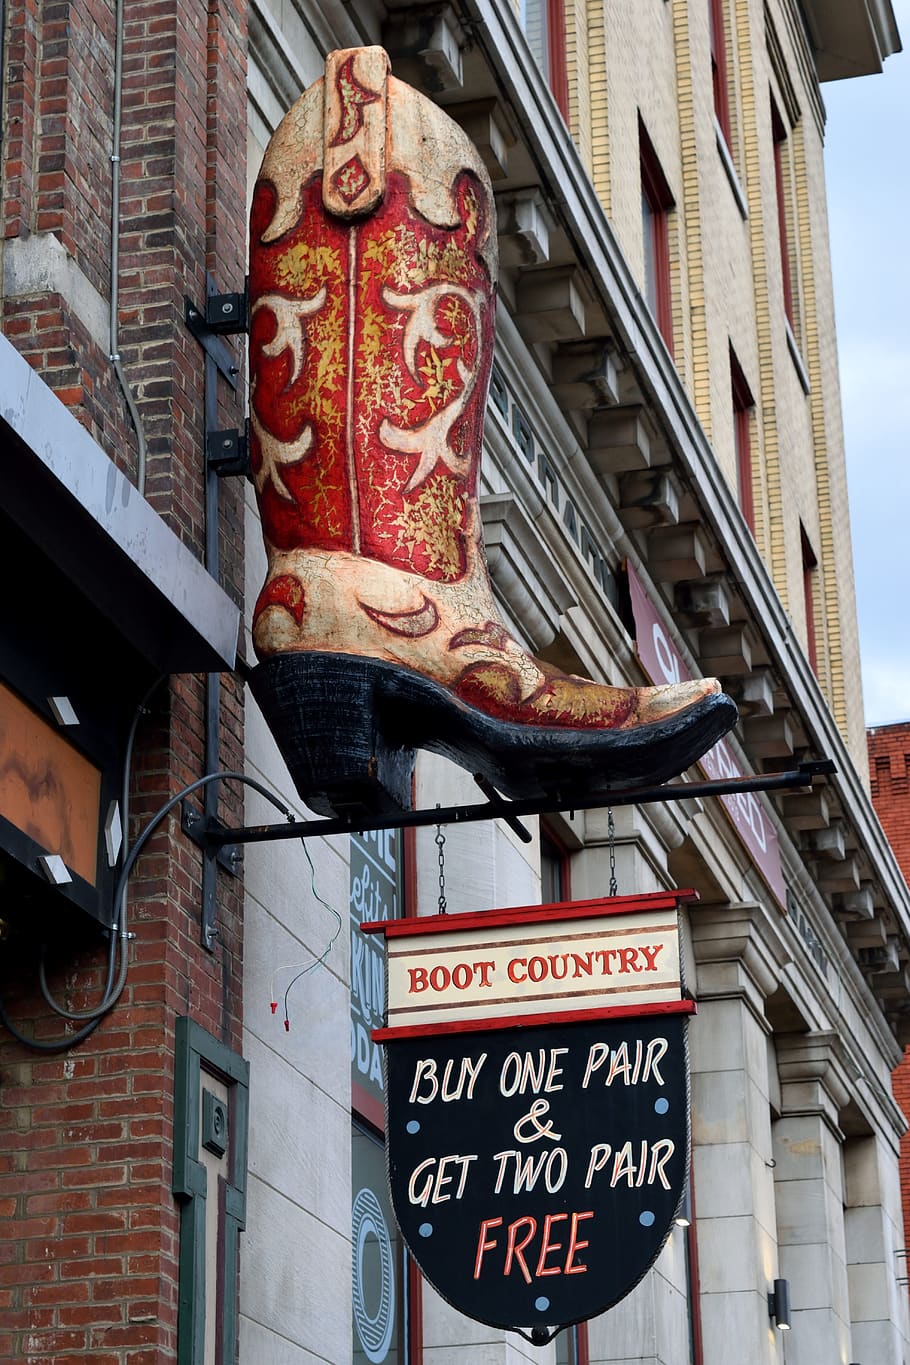 boots for sale, sign, advertisement, store, shop, nashville tennessee, famous place, tourism, travel, music city usa